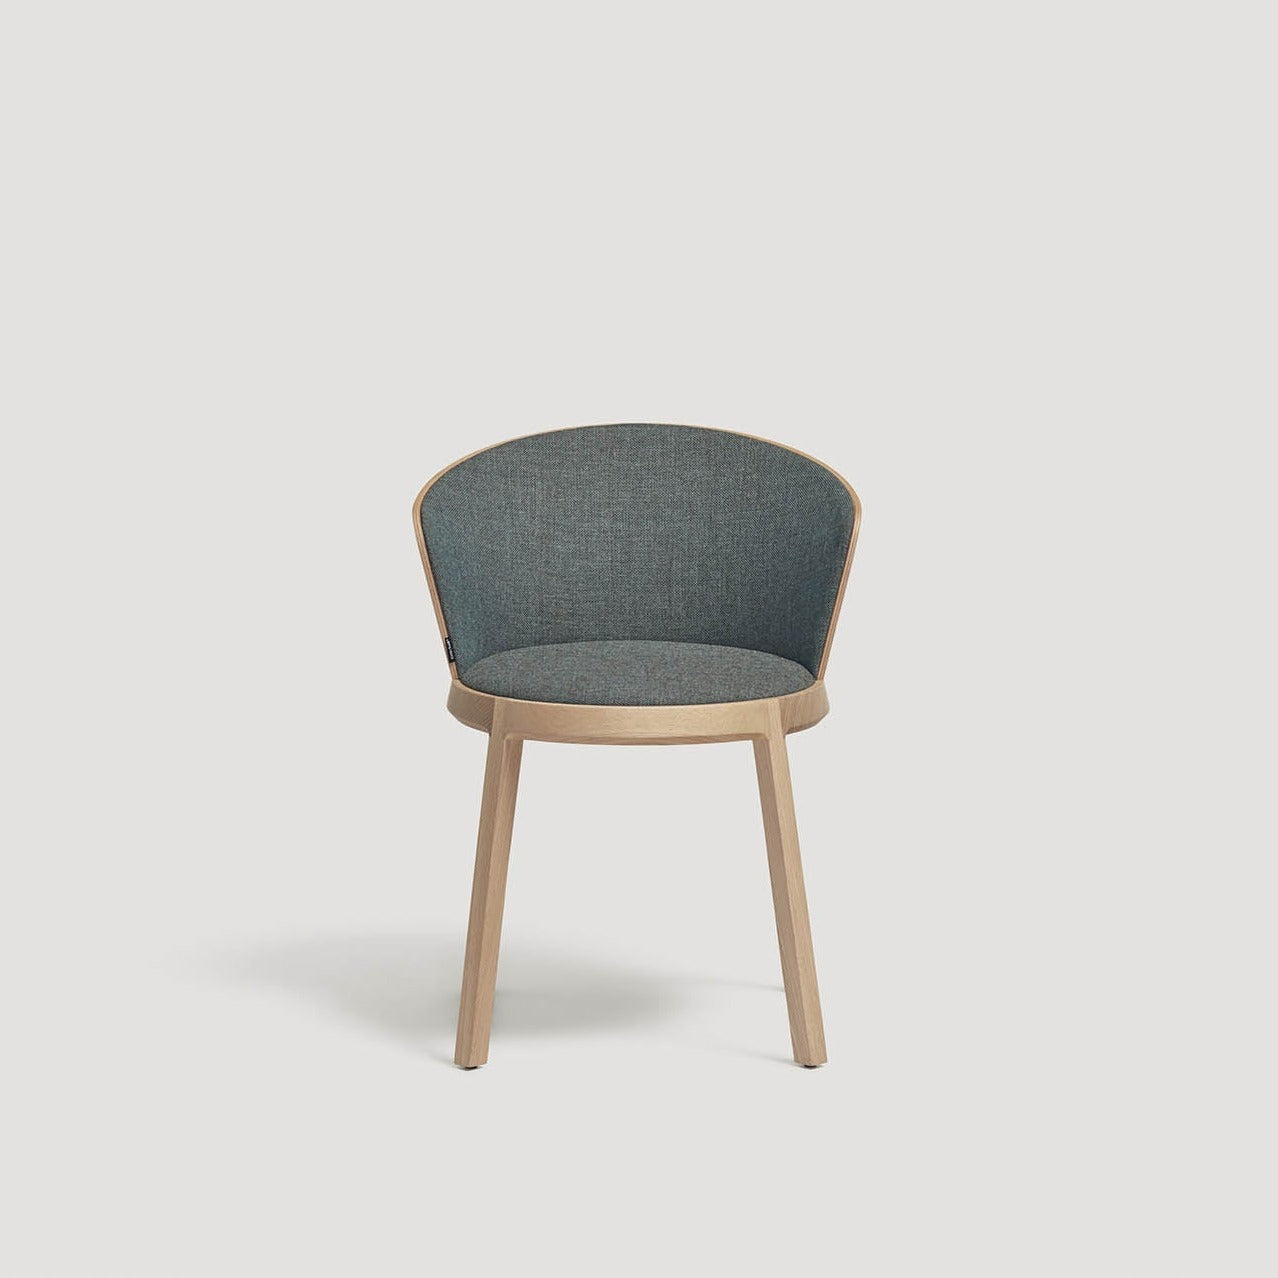 SILLA ARO Chair front view, natural base and backrest